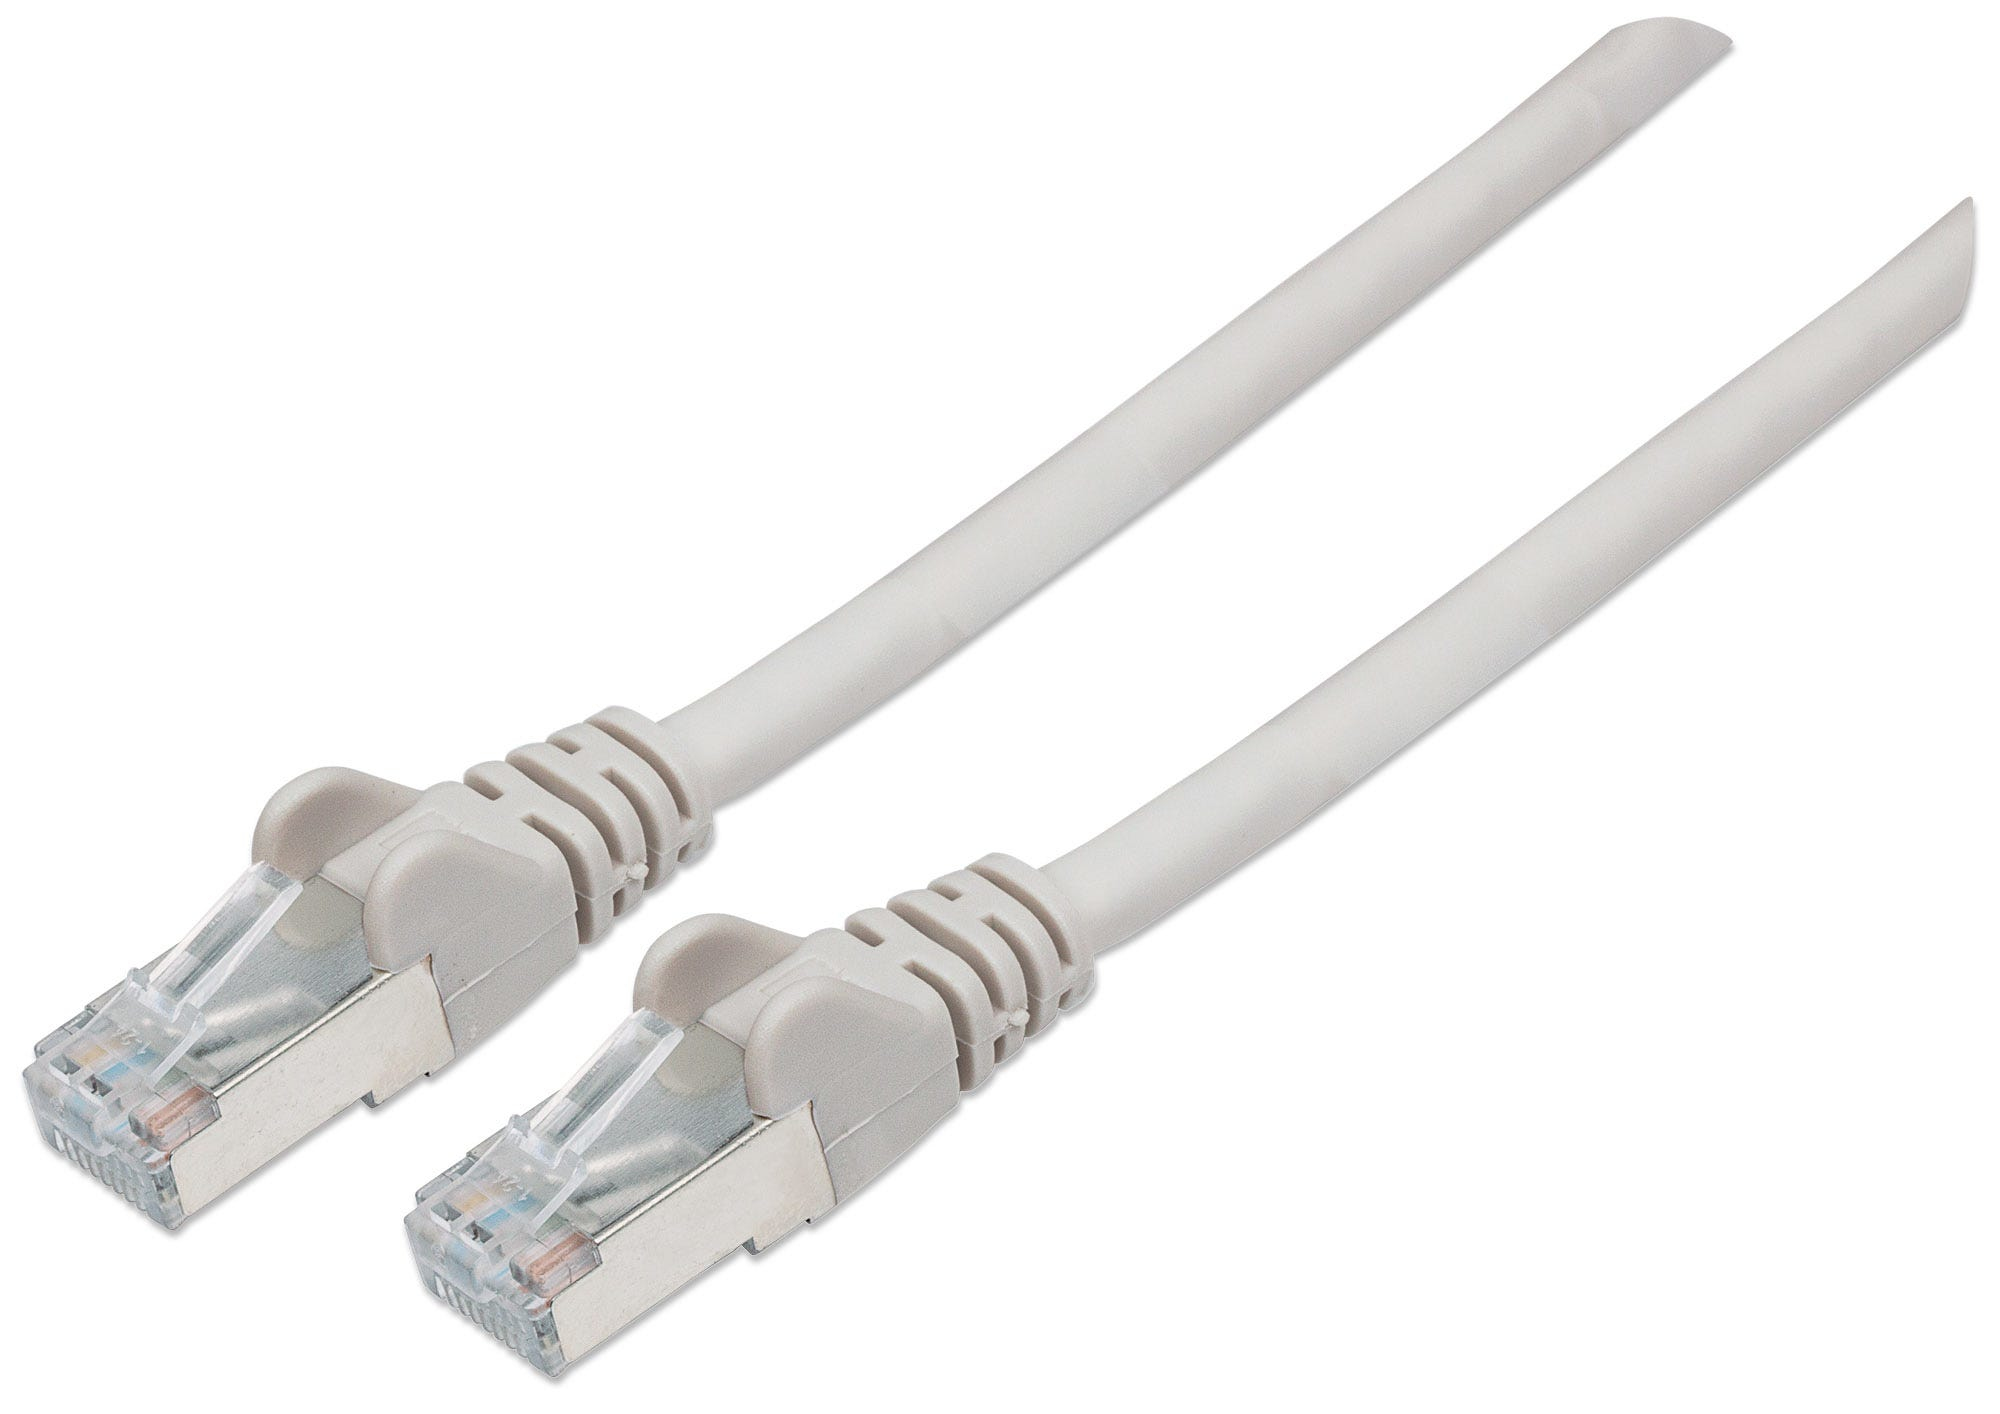 Photos - Cable (video, audio, USB) INTELLINET Network Patch Cable, Cat6, 20m, Grey, Copper, S/FTP, LSOH / 733 